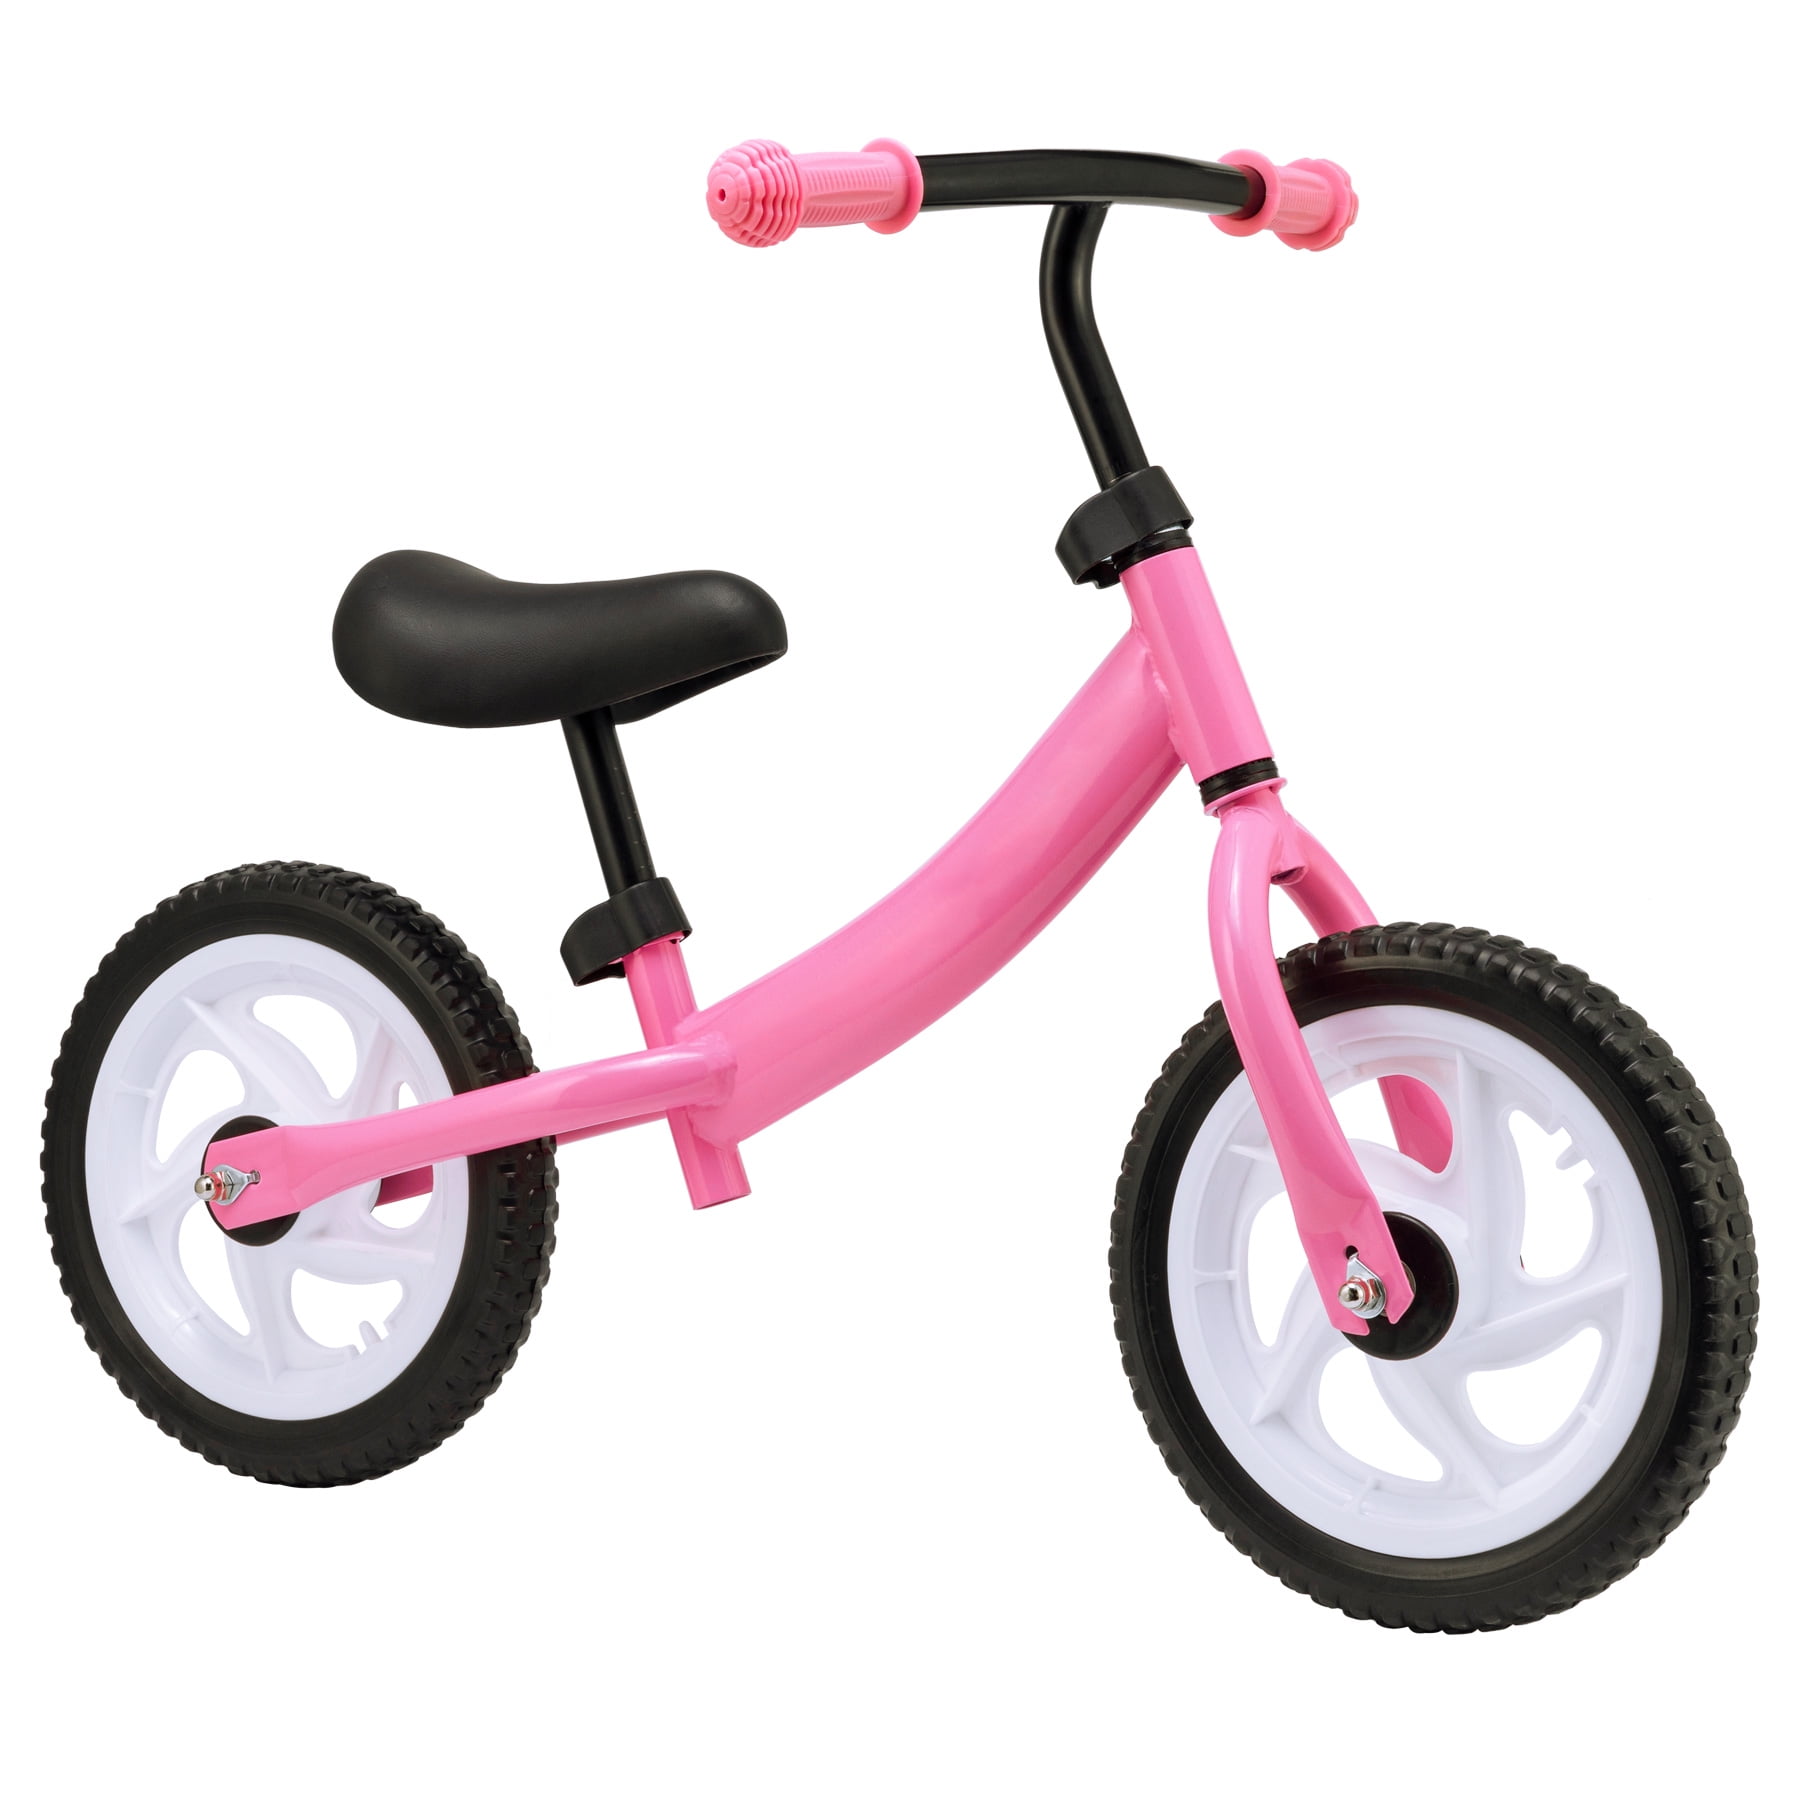 Details about   12” Kids Bicycle Balance Bike Children No-Pedal Learn To Ride Bike For 2-6 